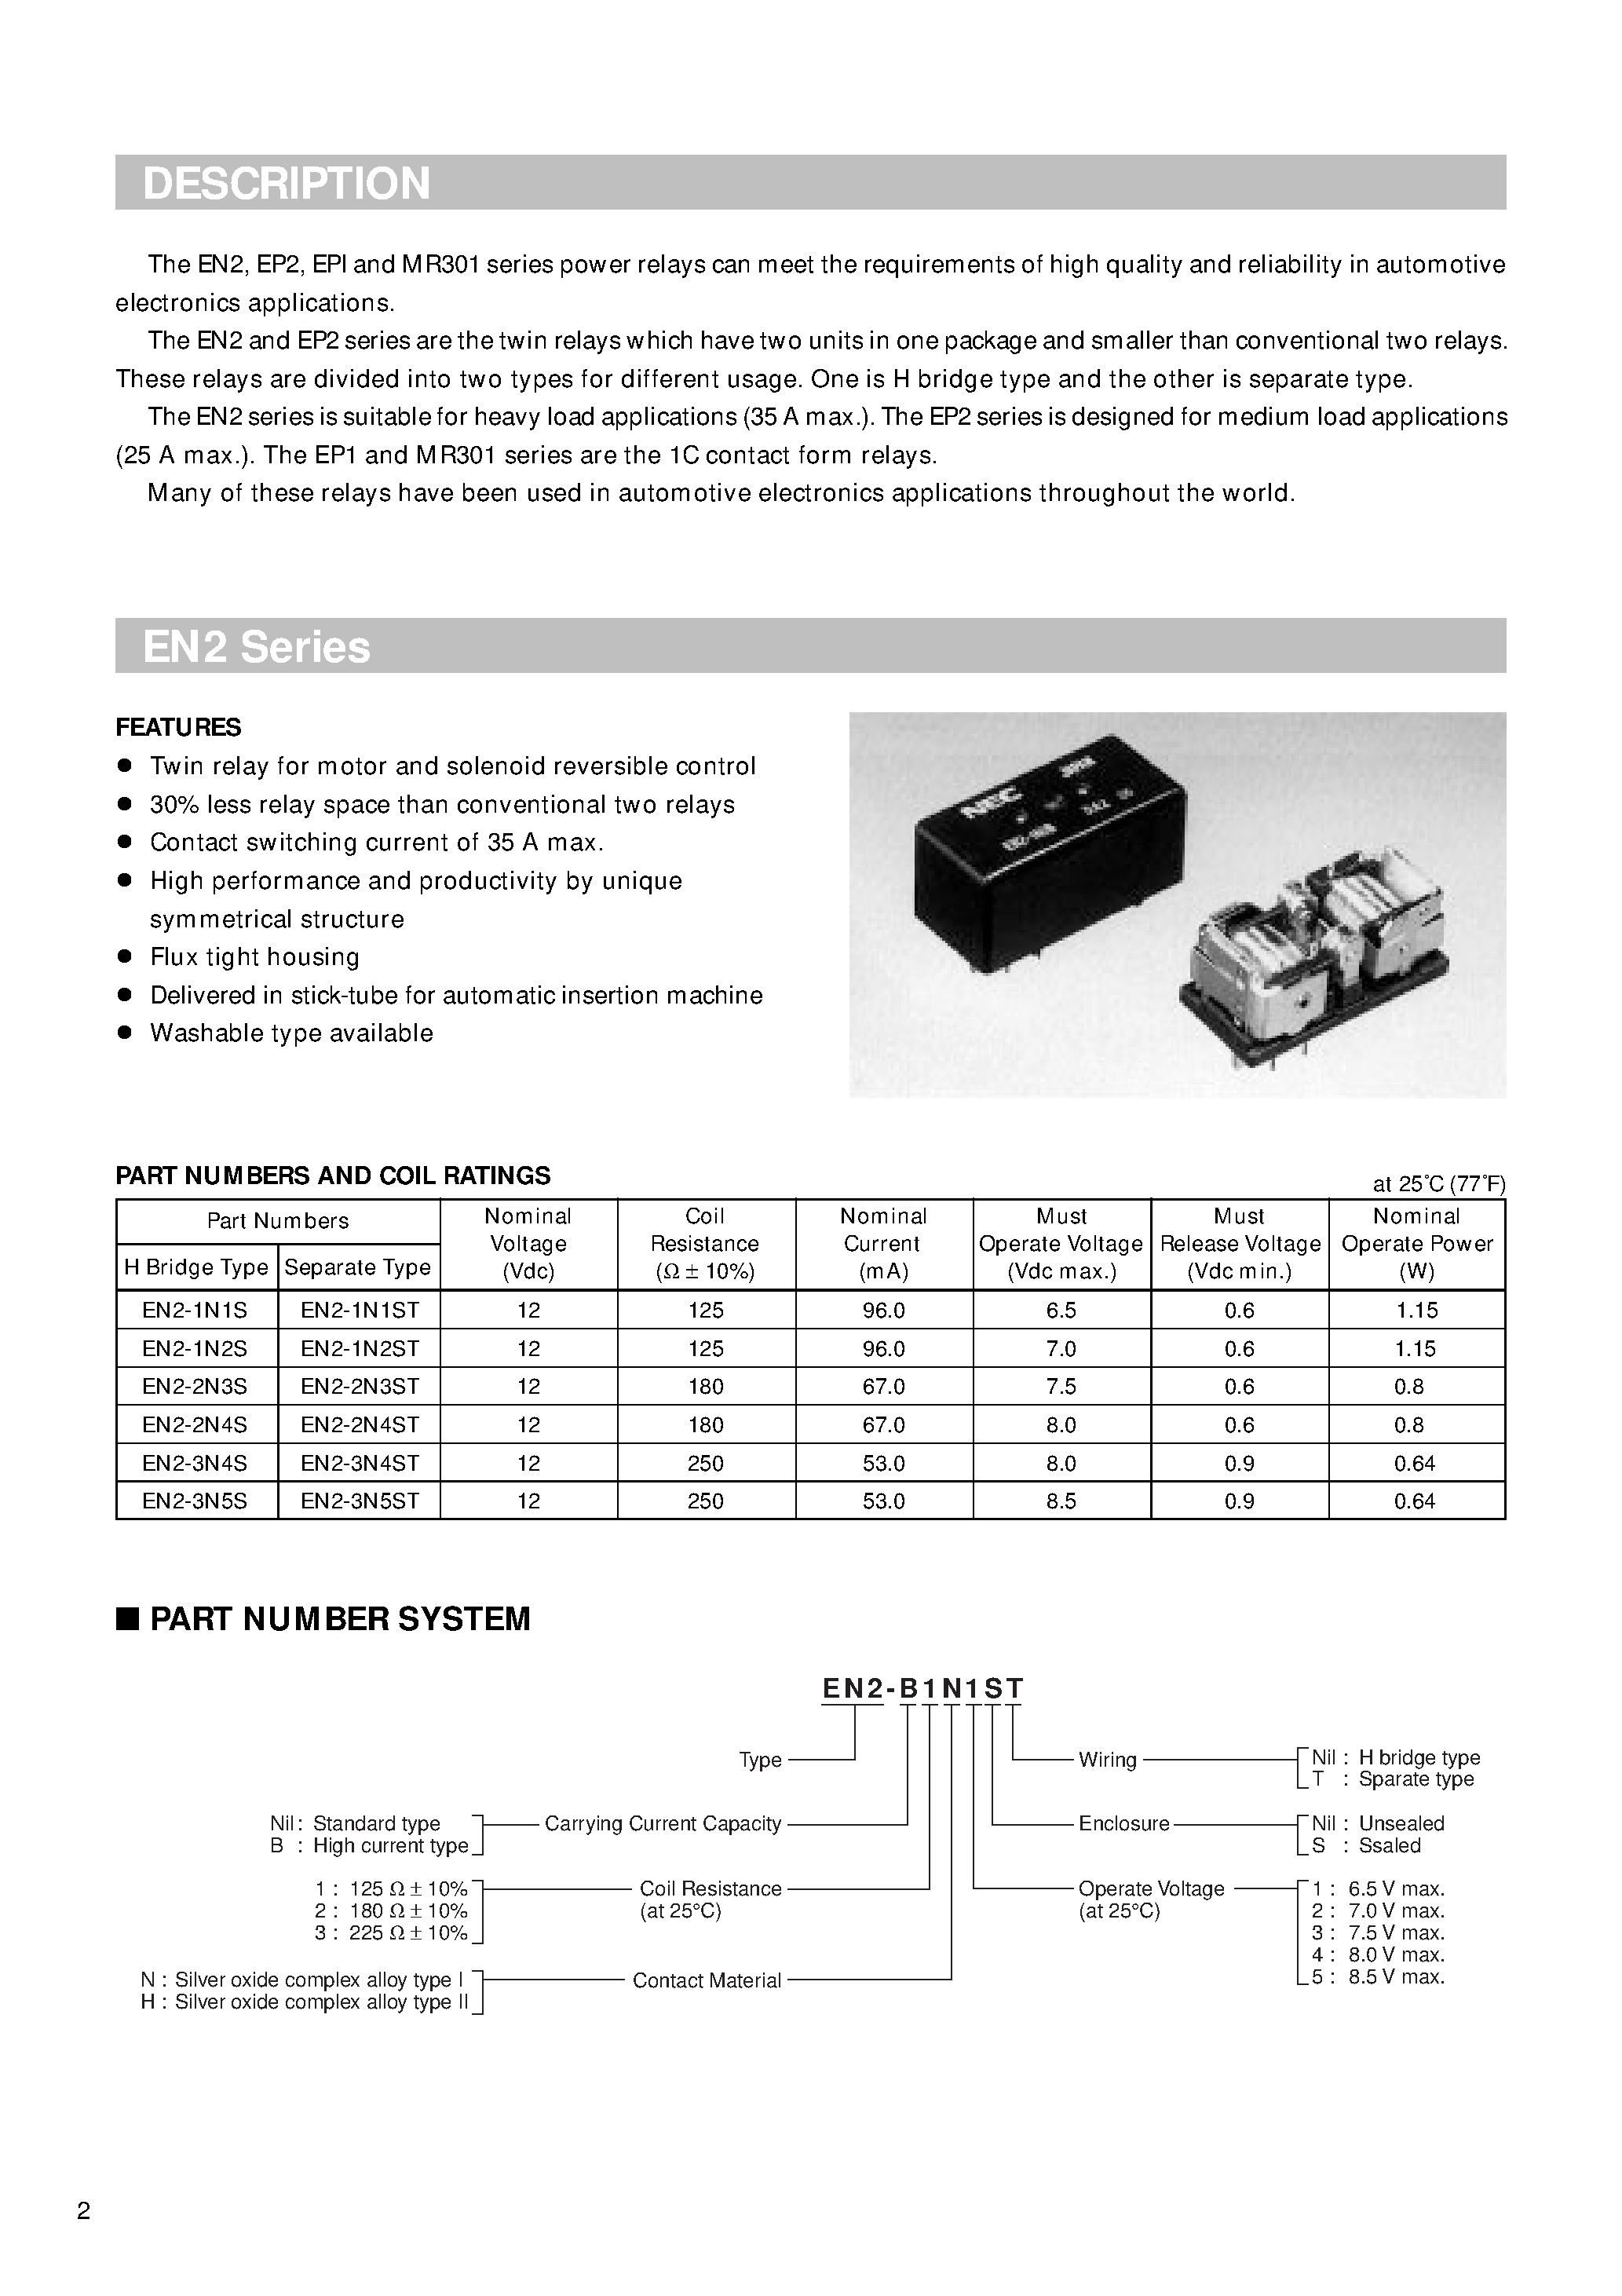 Datasheet EN2-1N3S - Twin relay for motor and solenoid reversible control page 2